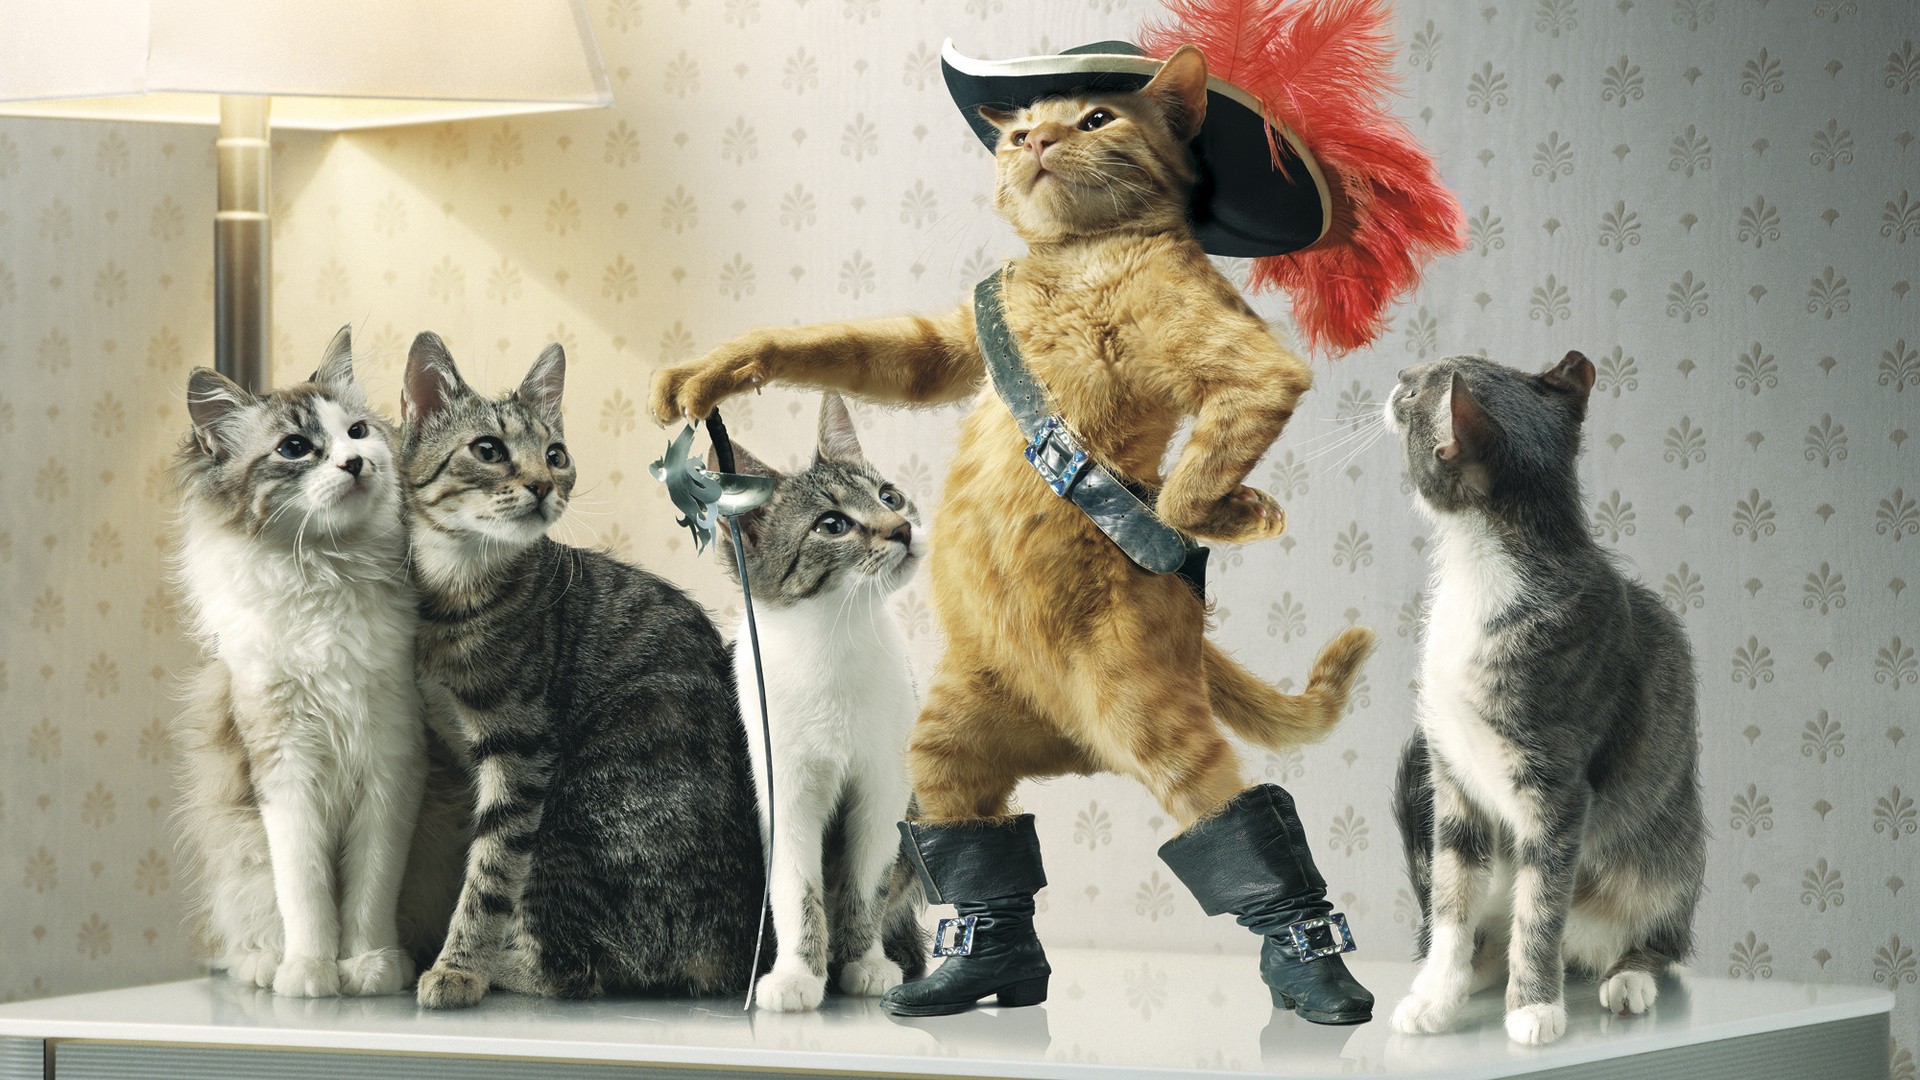 General 1920x1080 cats Puss in Boots photo manipulation book characters